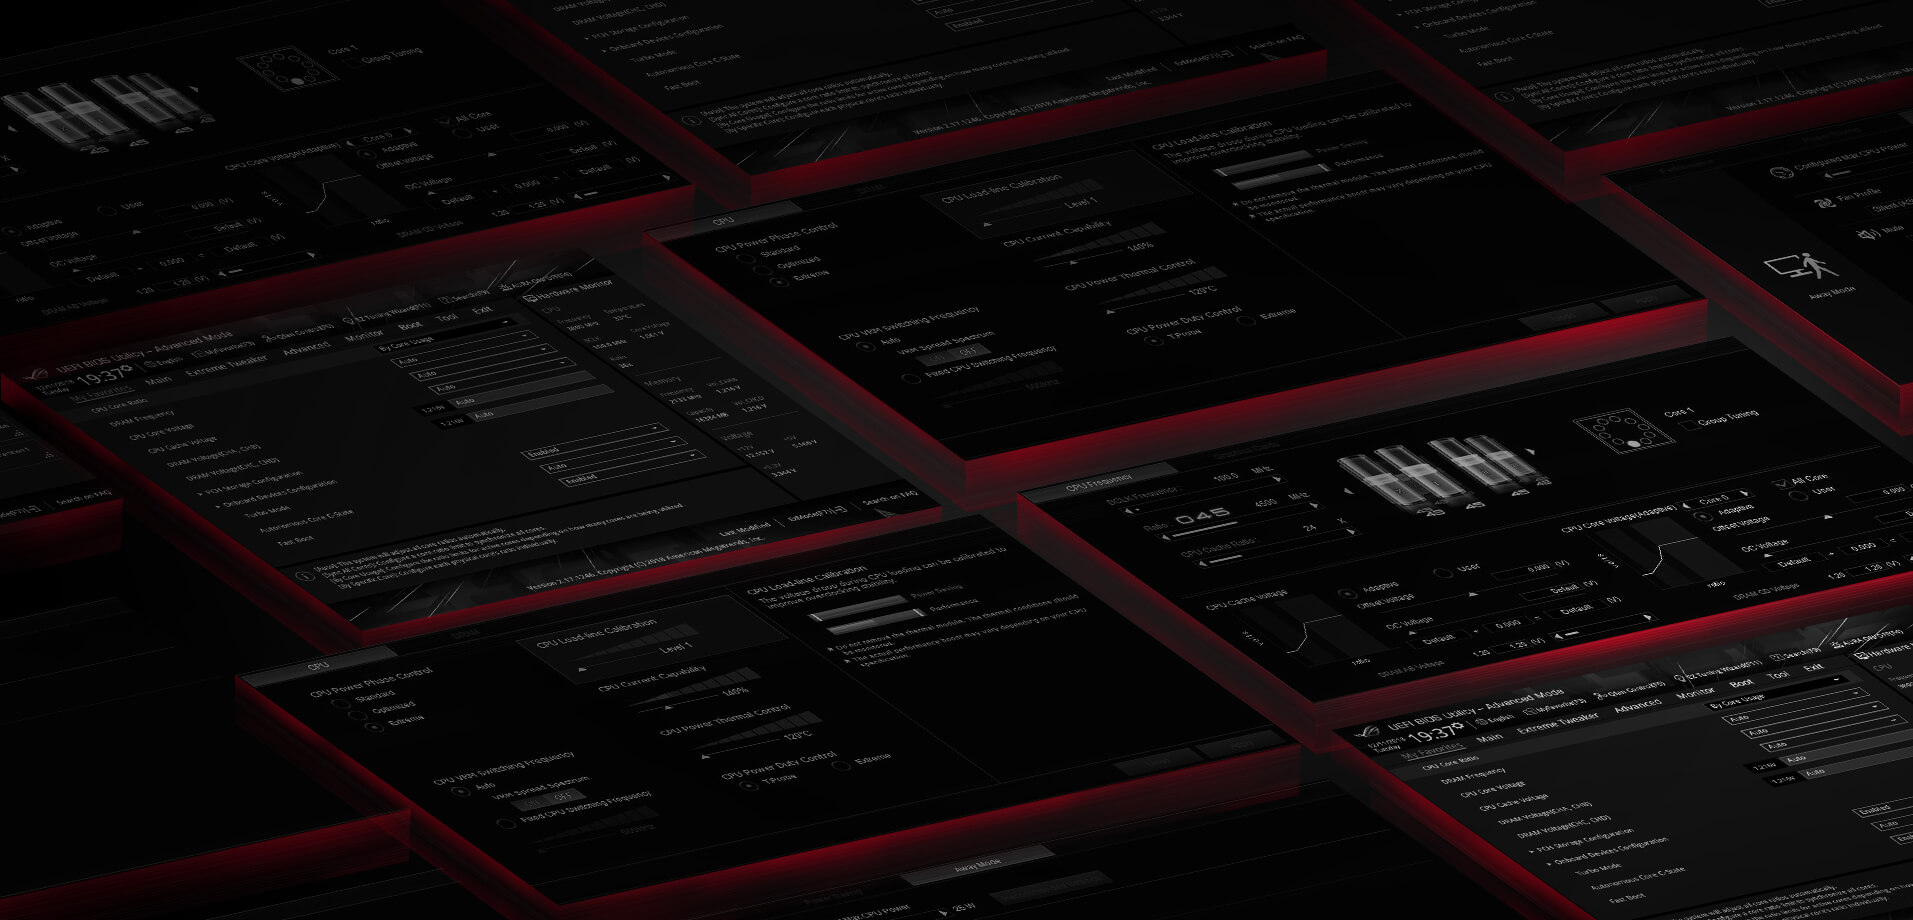 The software UI overview of ROG Maximus XIII Extreme